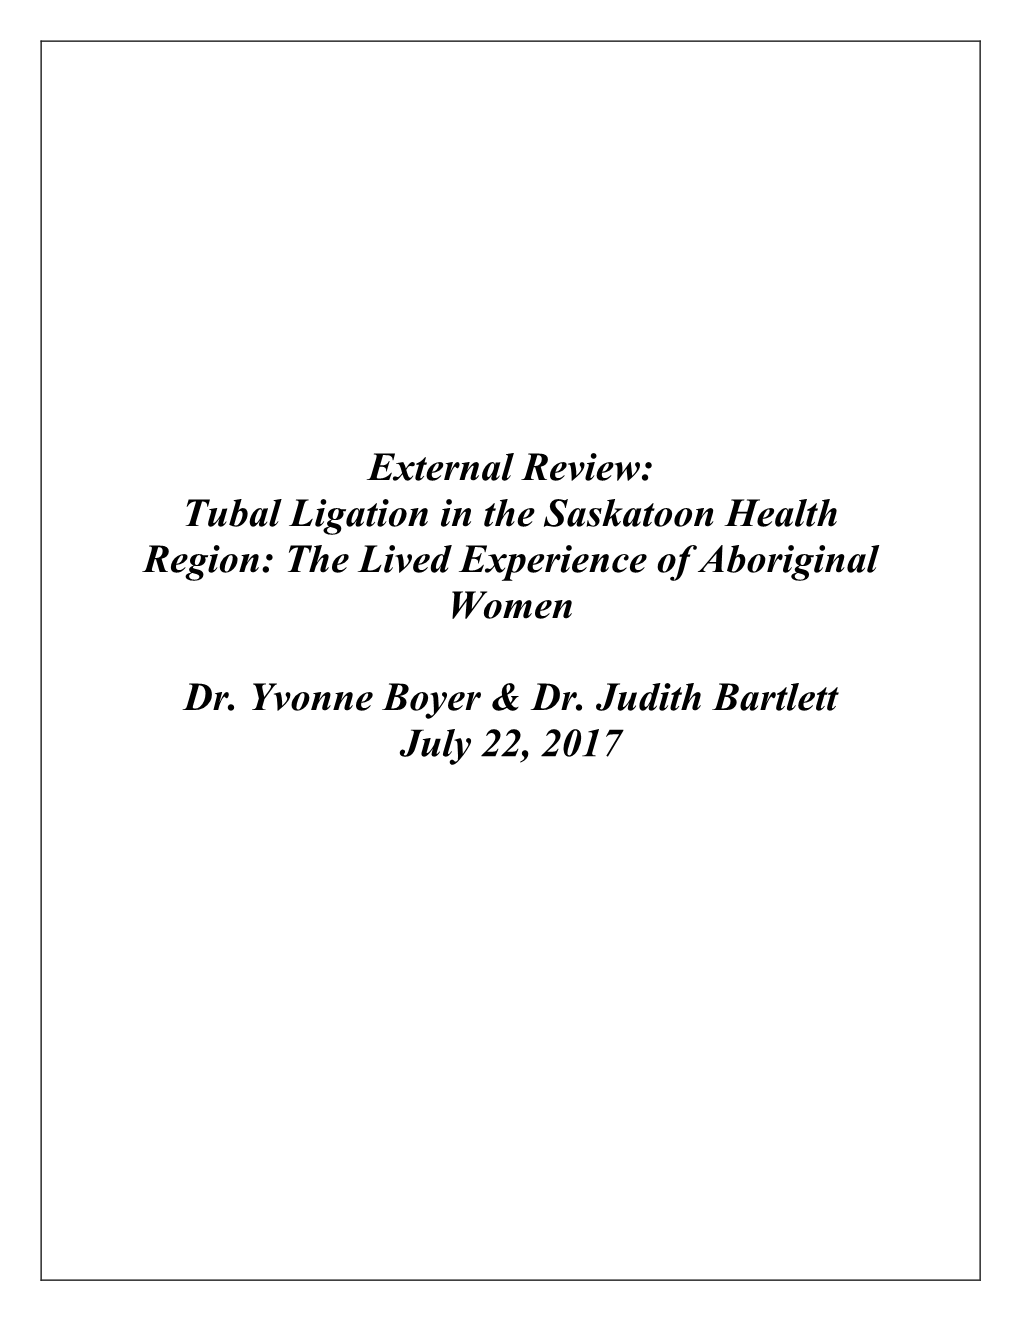 The Lived Experience of Aboriginal Women Dr. Yvonne Boyer, Dr